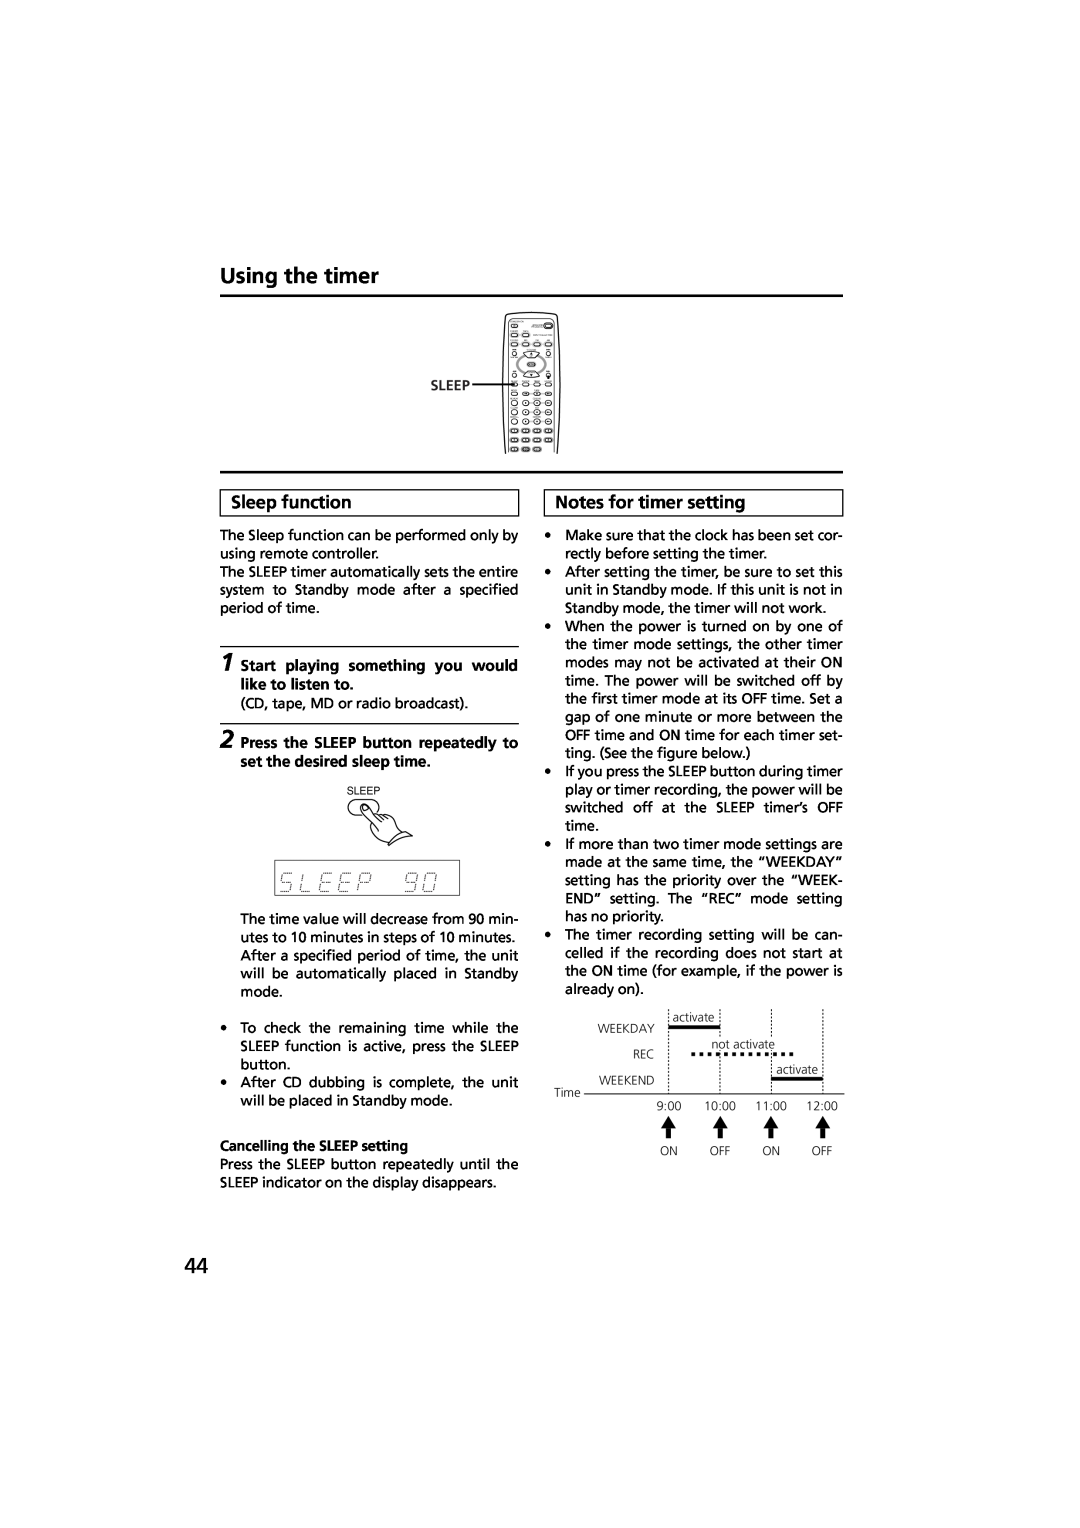 Onkyo R-801A instruction manual Sleep function, Notes for timer setting, Cancelling the SLEEP setting, Using the timer 